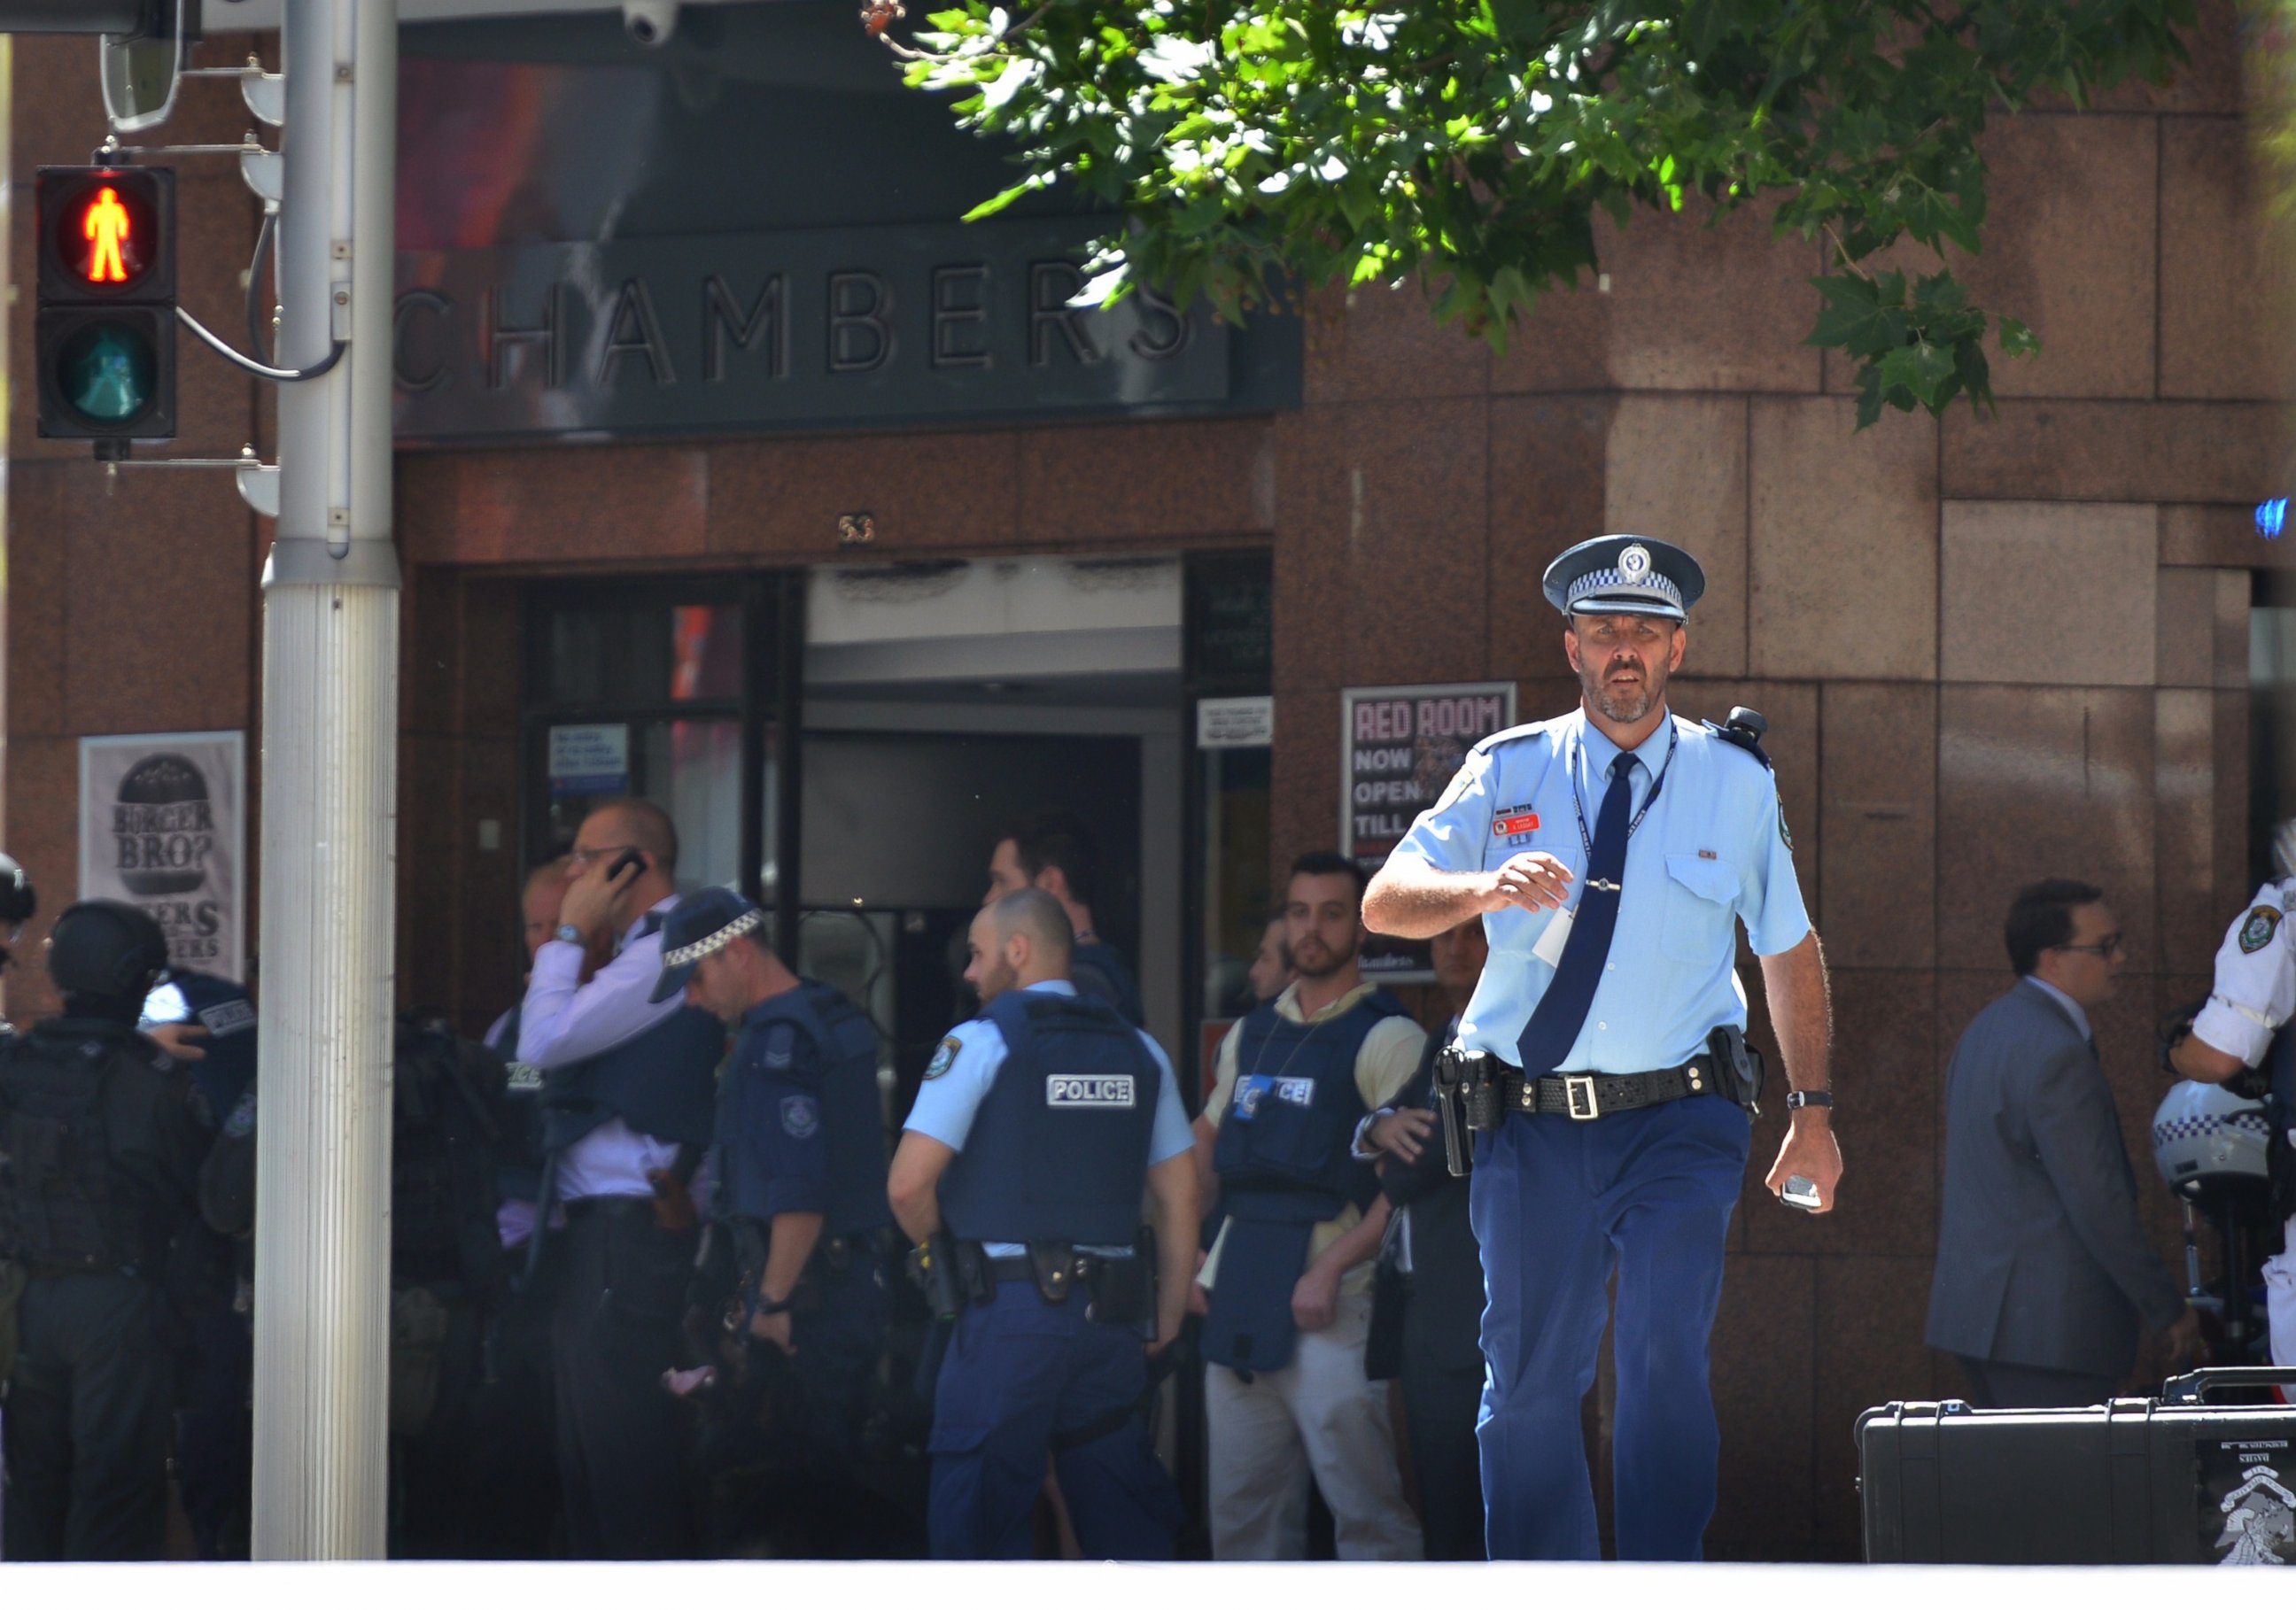 PHOTO: Armed police are seen outside a cafe in the central business district of Sydney on Dec. 15, 2014.  